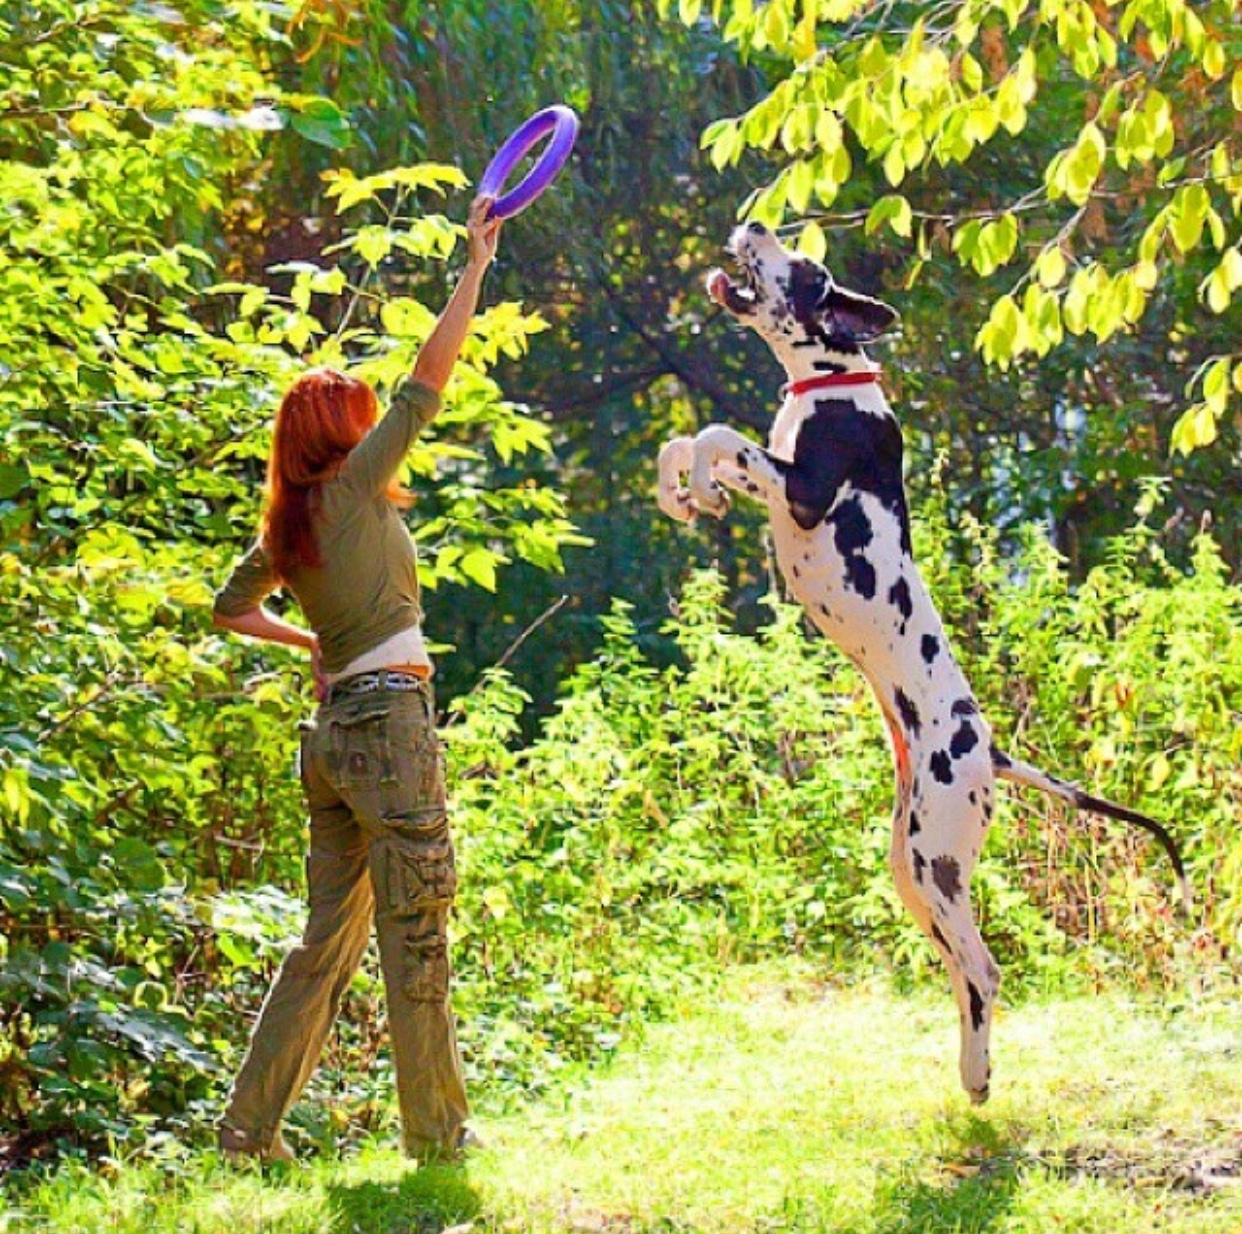 a woman holding up a ring chew toy while a Great Dane is jumping towards